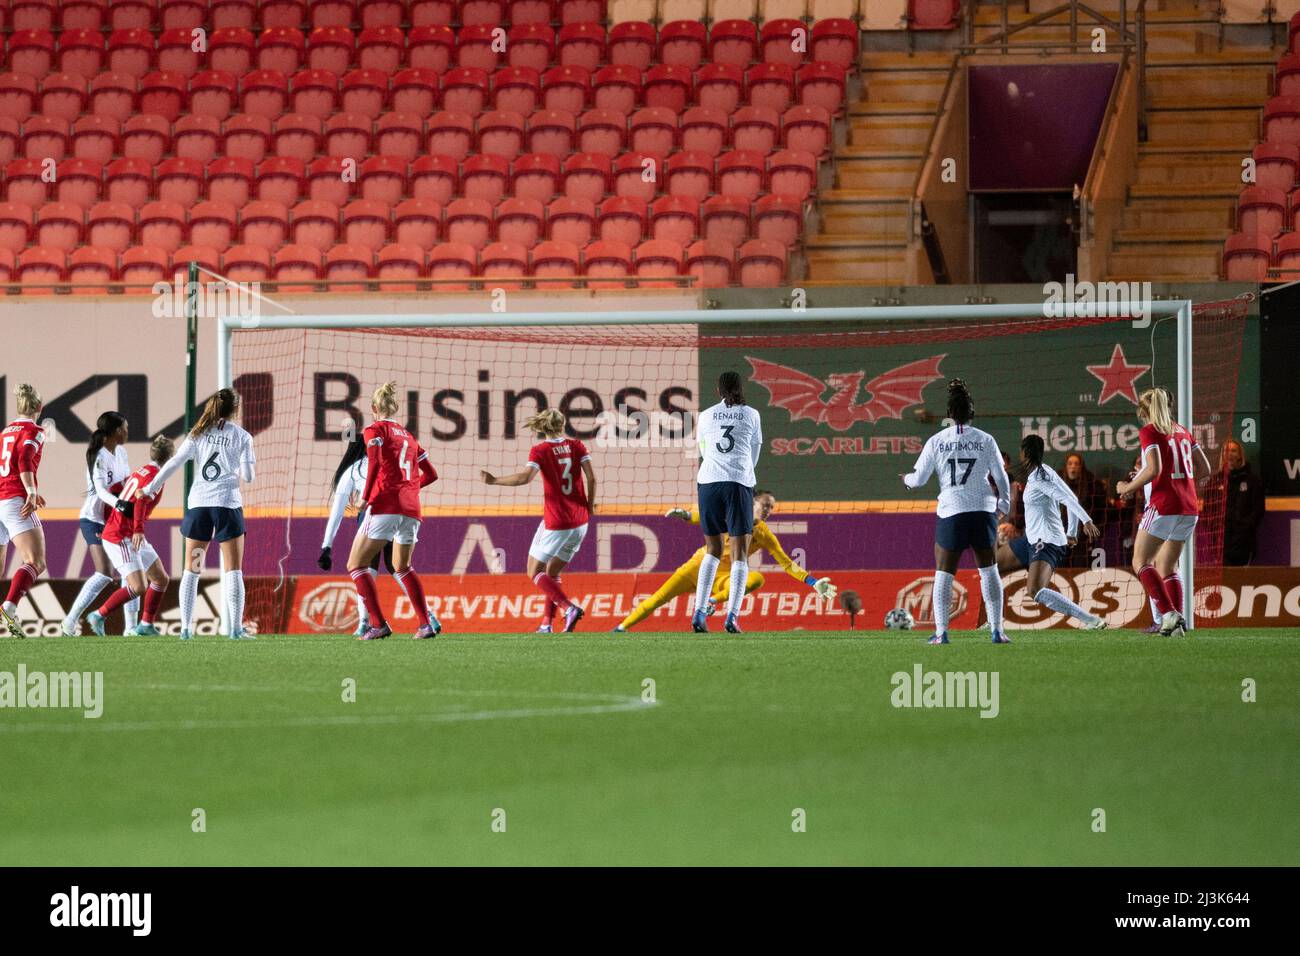 Llanelli, Großbritannien. 08. April 2022. Wales gegen Frankreich, FIFA Women’s World Cup Qualifier, Parc Y Scarlets, Llanelli, UK, 8/4/22: PIC by Andrew Dowling Photography/Alamy Live News Credit: Andrew Dowling/Alamy Live News Stockfoto